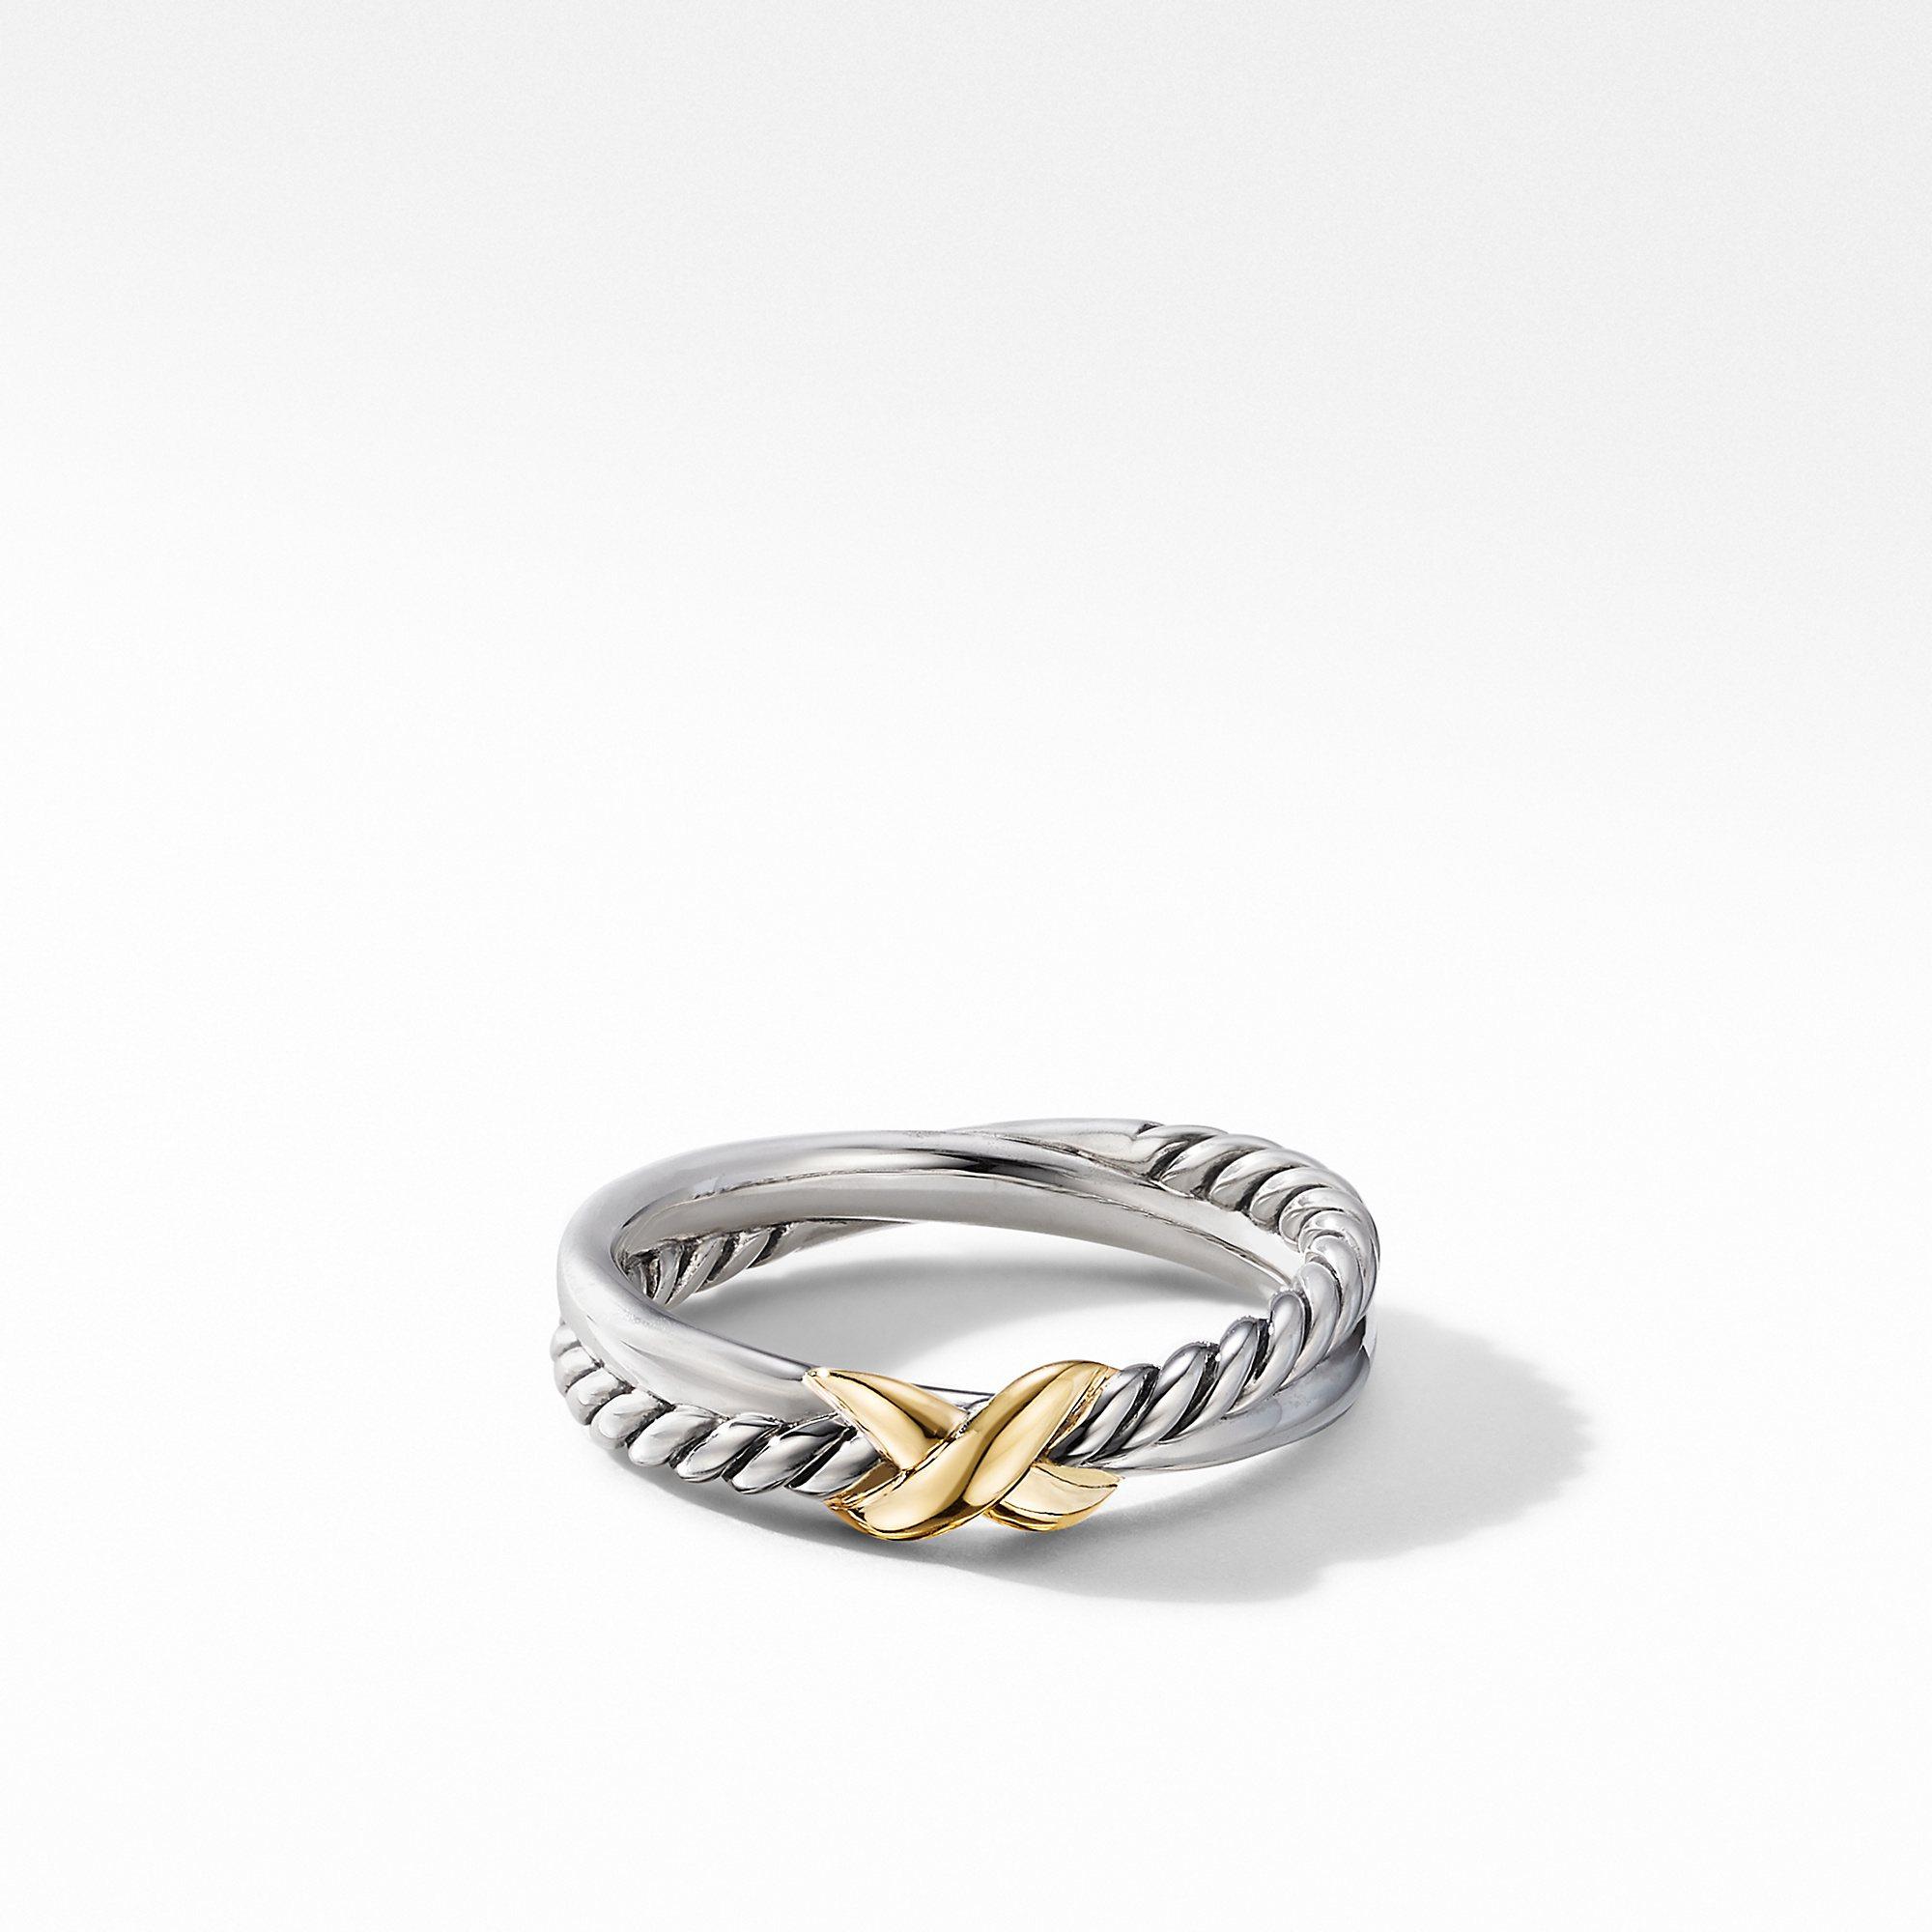 David Yurman Petite X Ring in Sterling Silver with 18k Yellow Gold, size 5